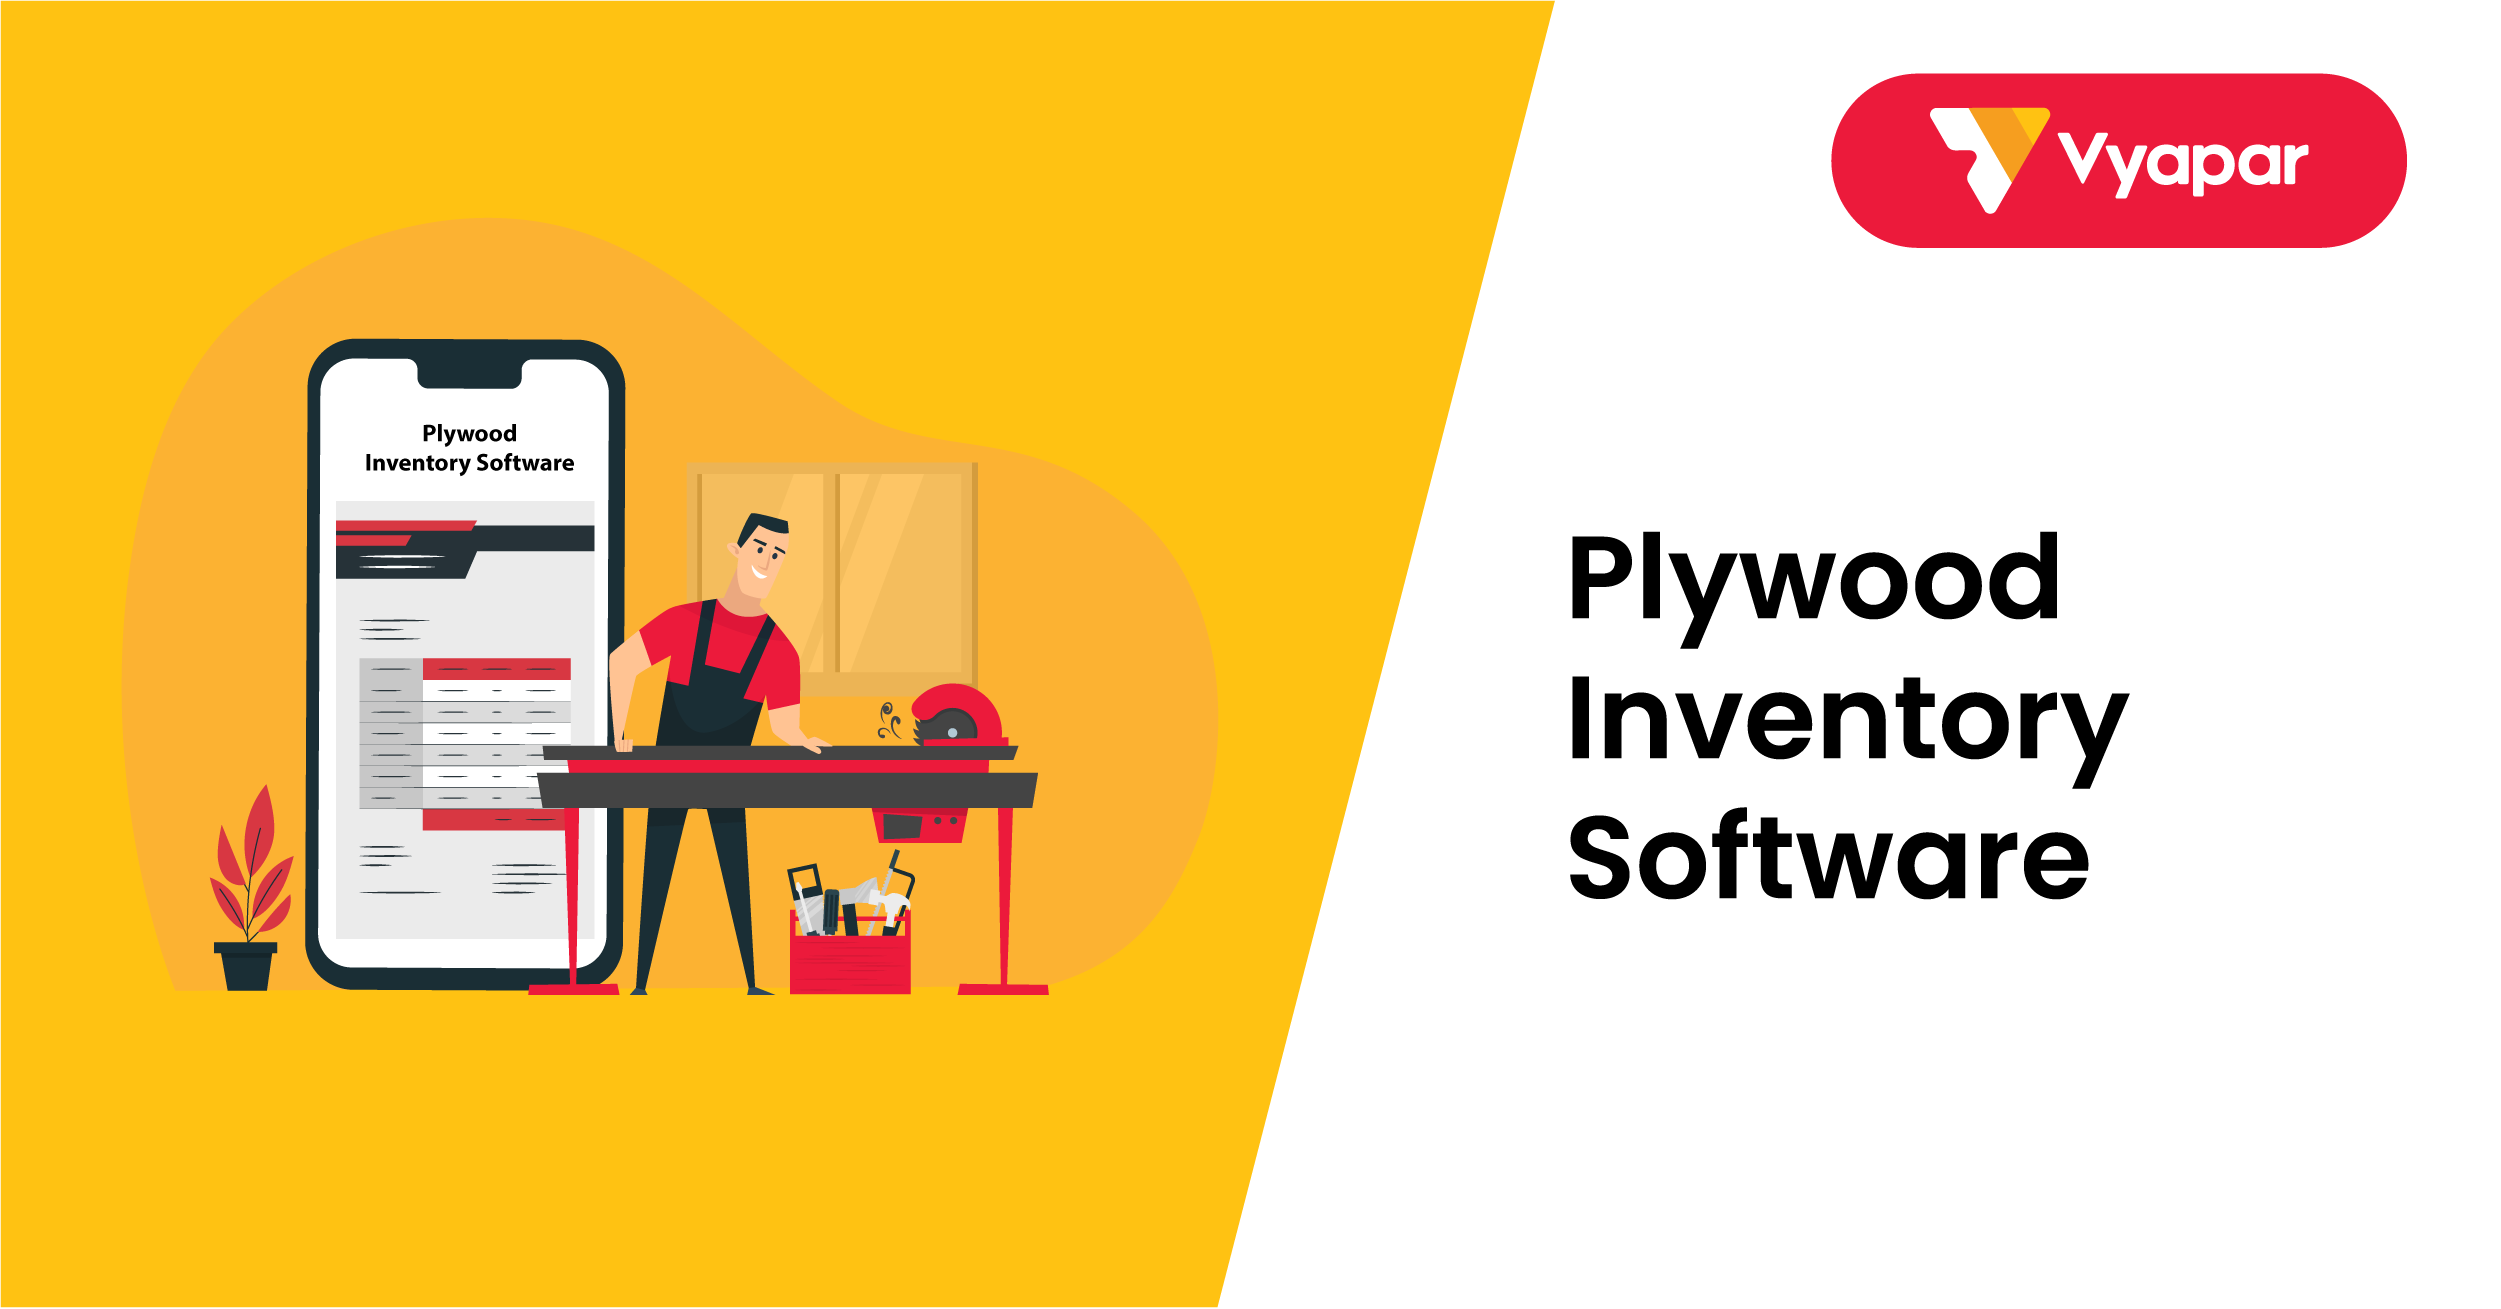 Plywood Inventory Software